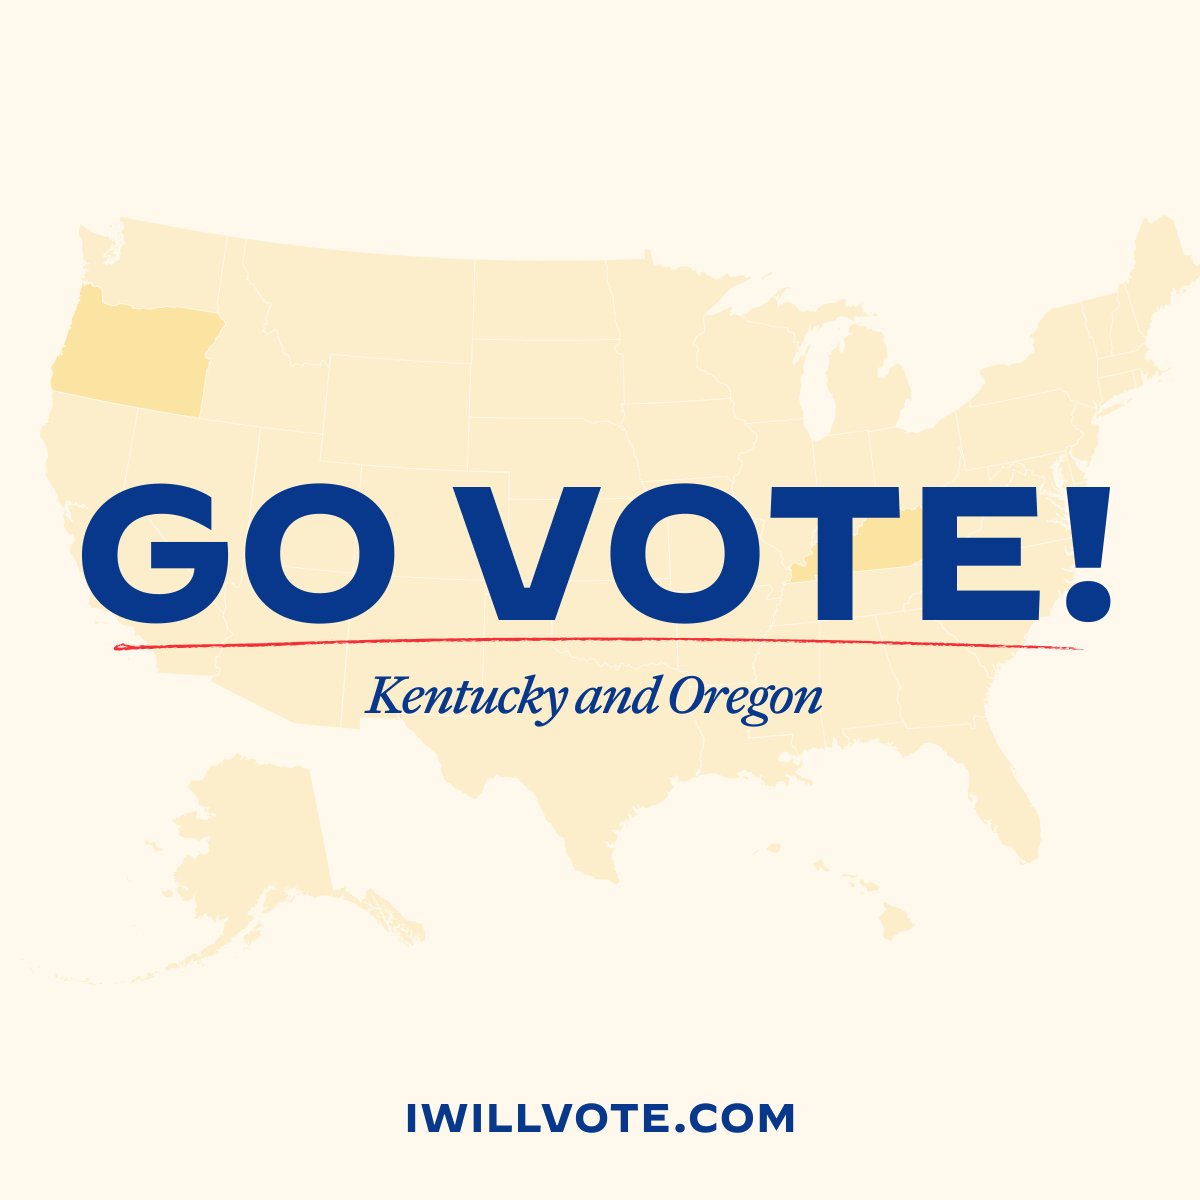 Kentucky and Oregon voters: Head to the polls to cast your ballot in the presidential primary! Check your polling place at IWillVote.com today.